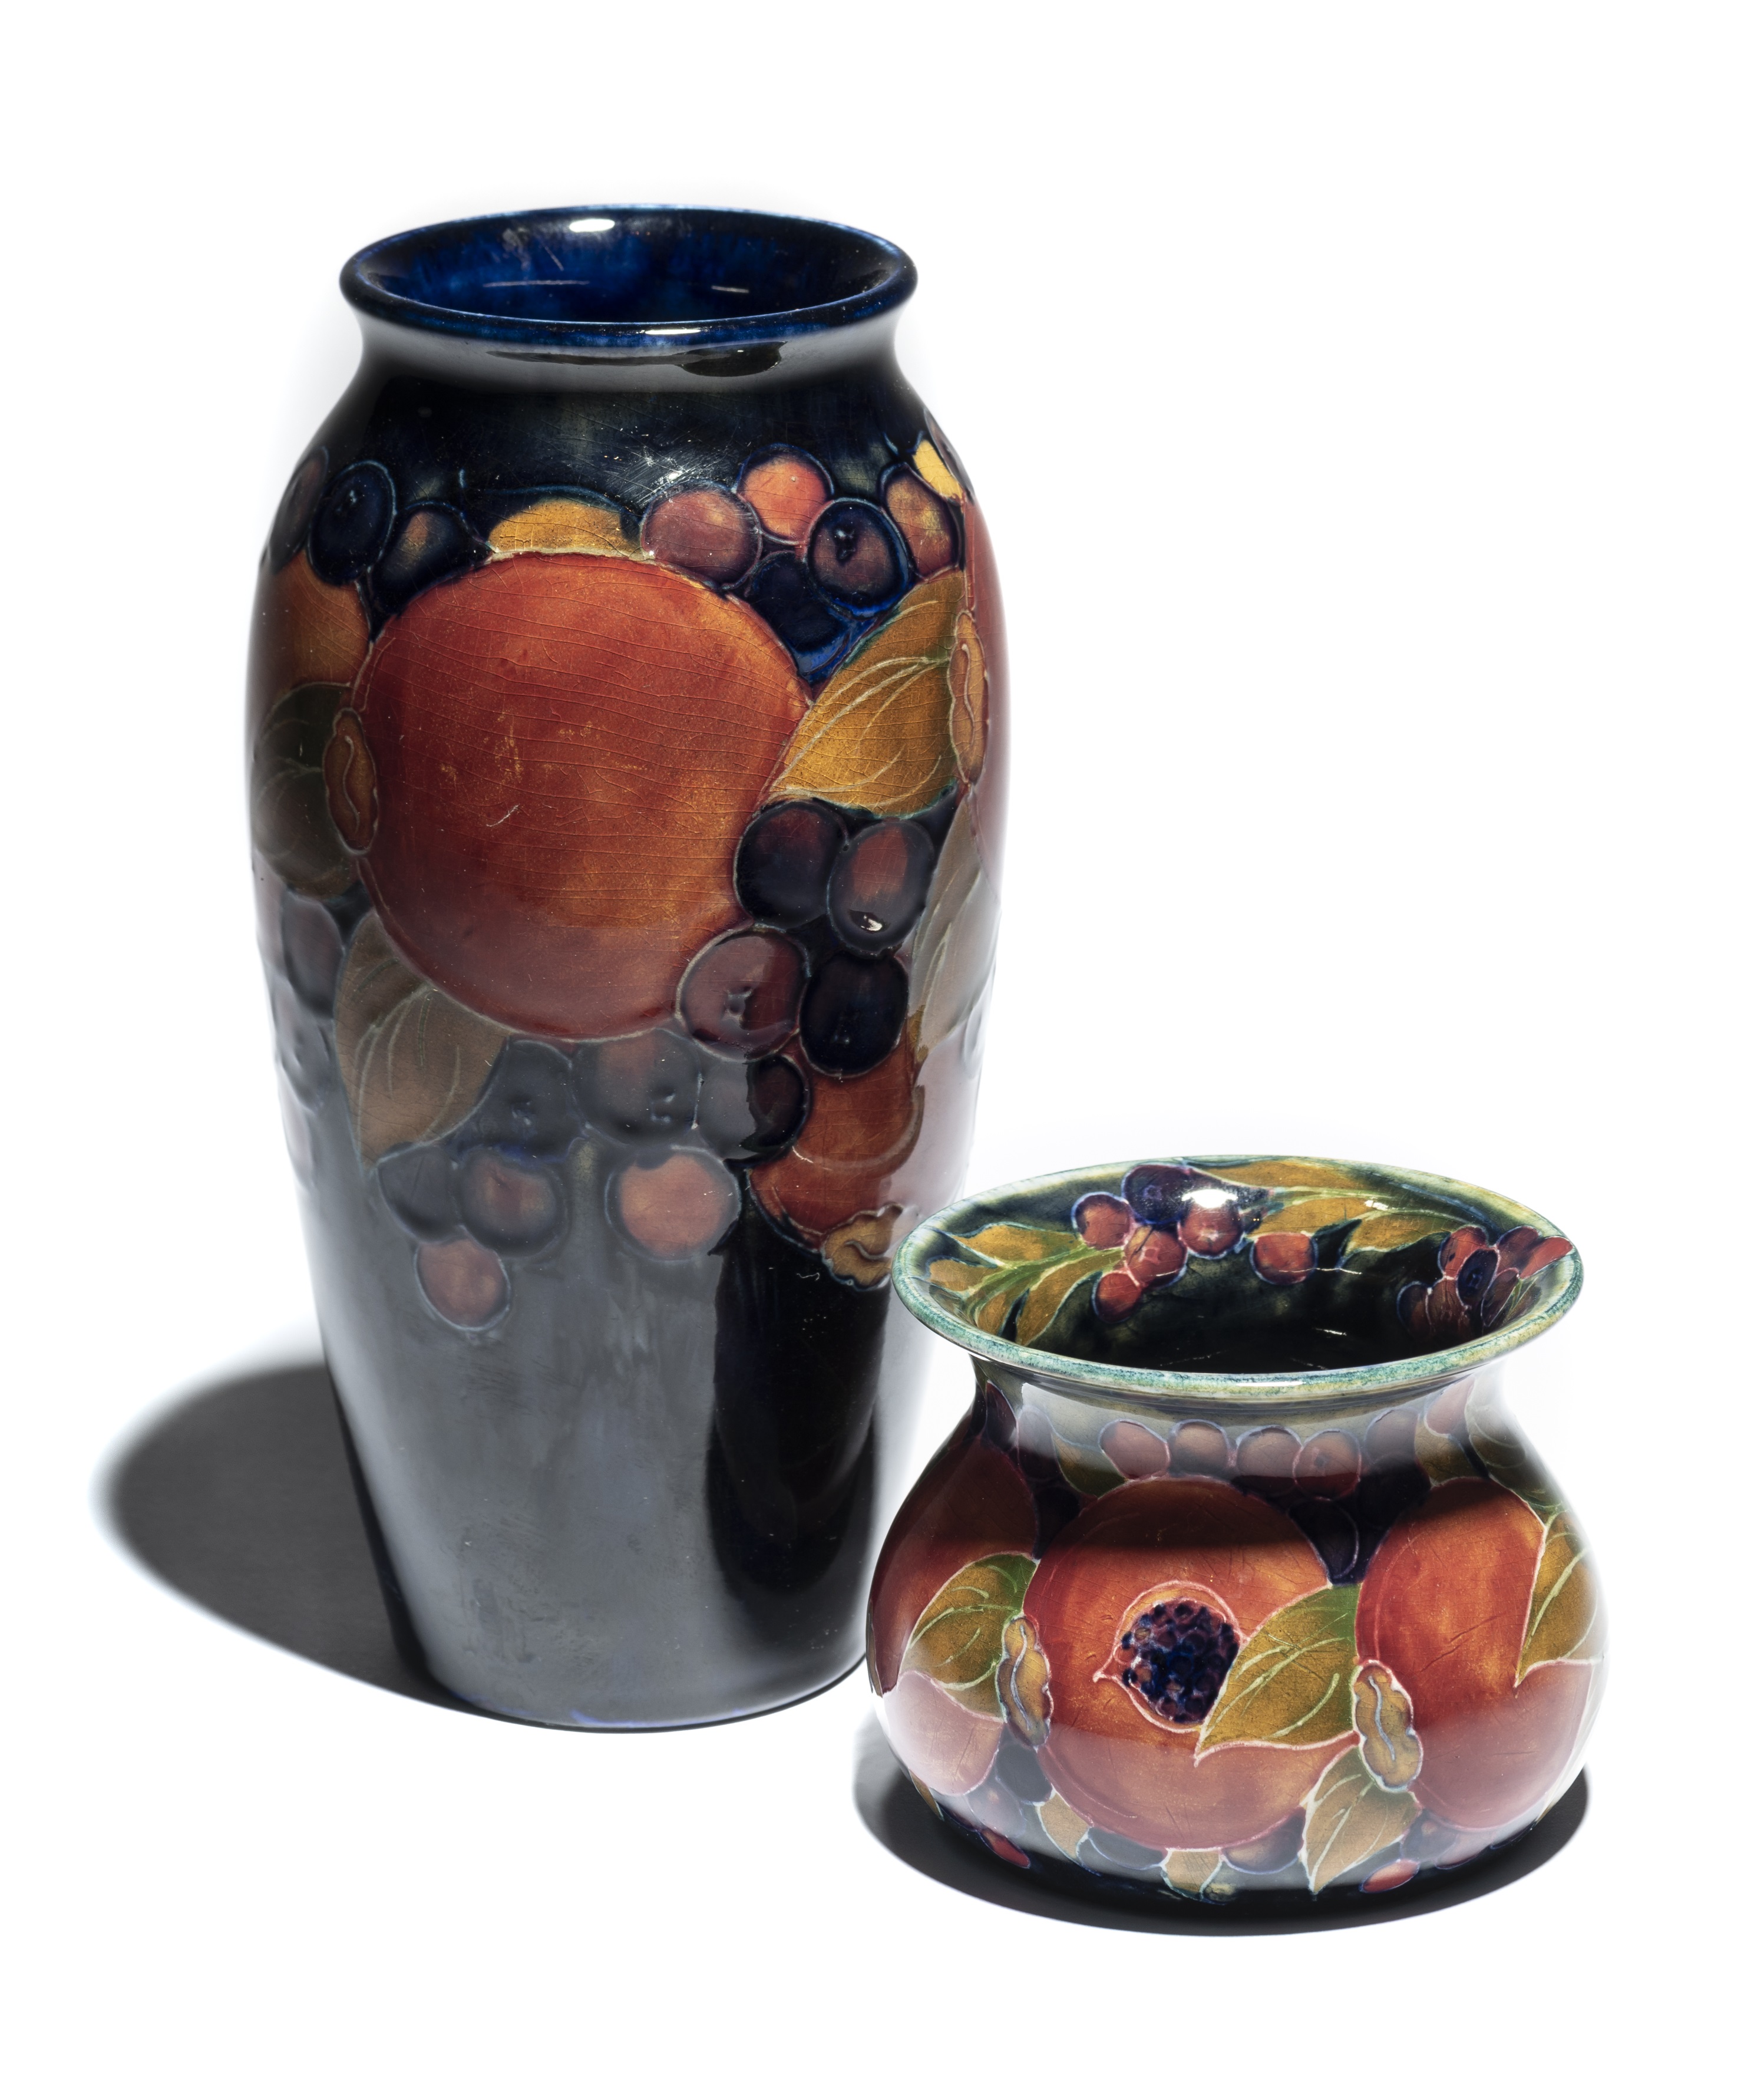 A WILLIAM MOORCROFT 'POMEGRANATE PATTERN' SMALL VASE, EARLY 20TH CENTURY